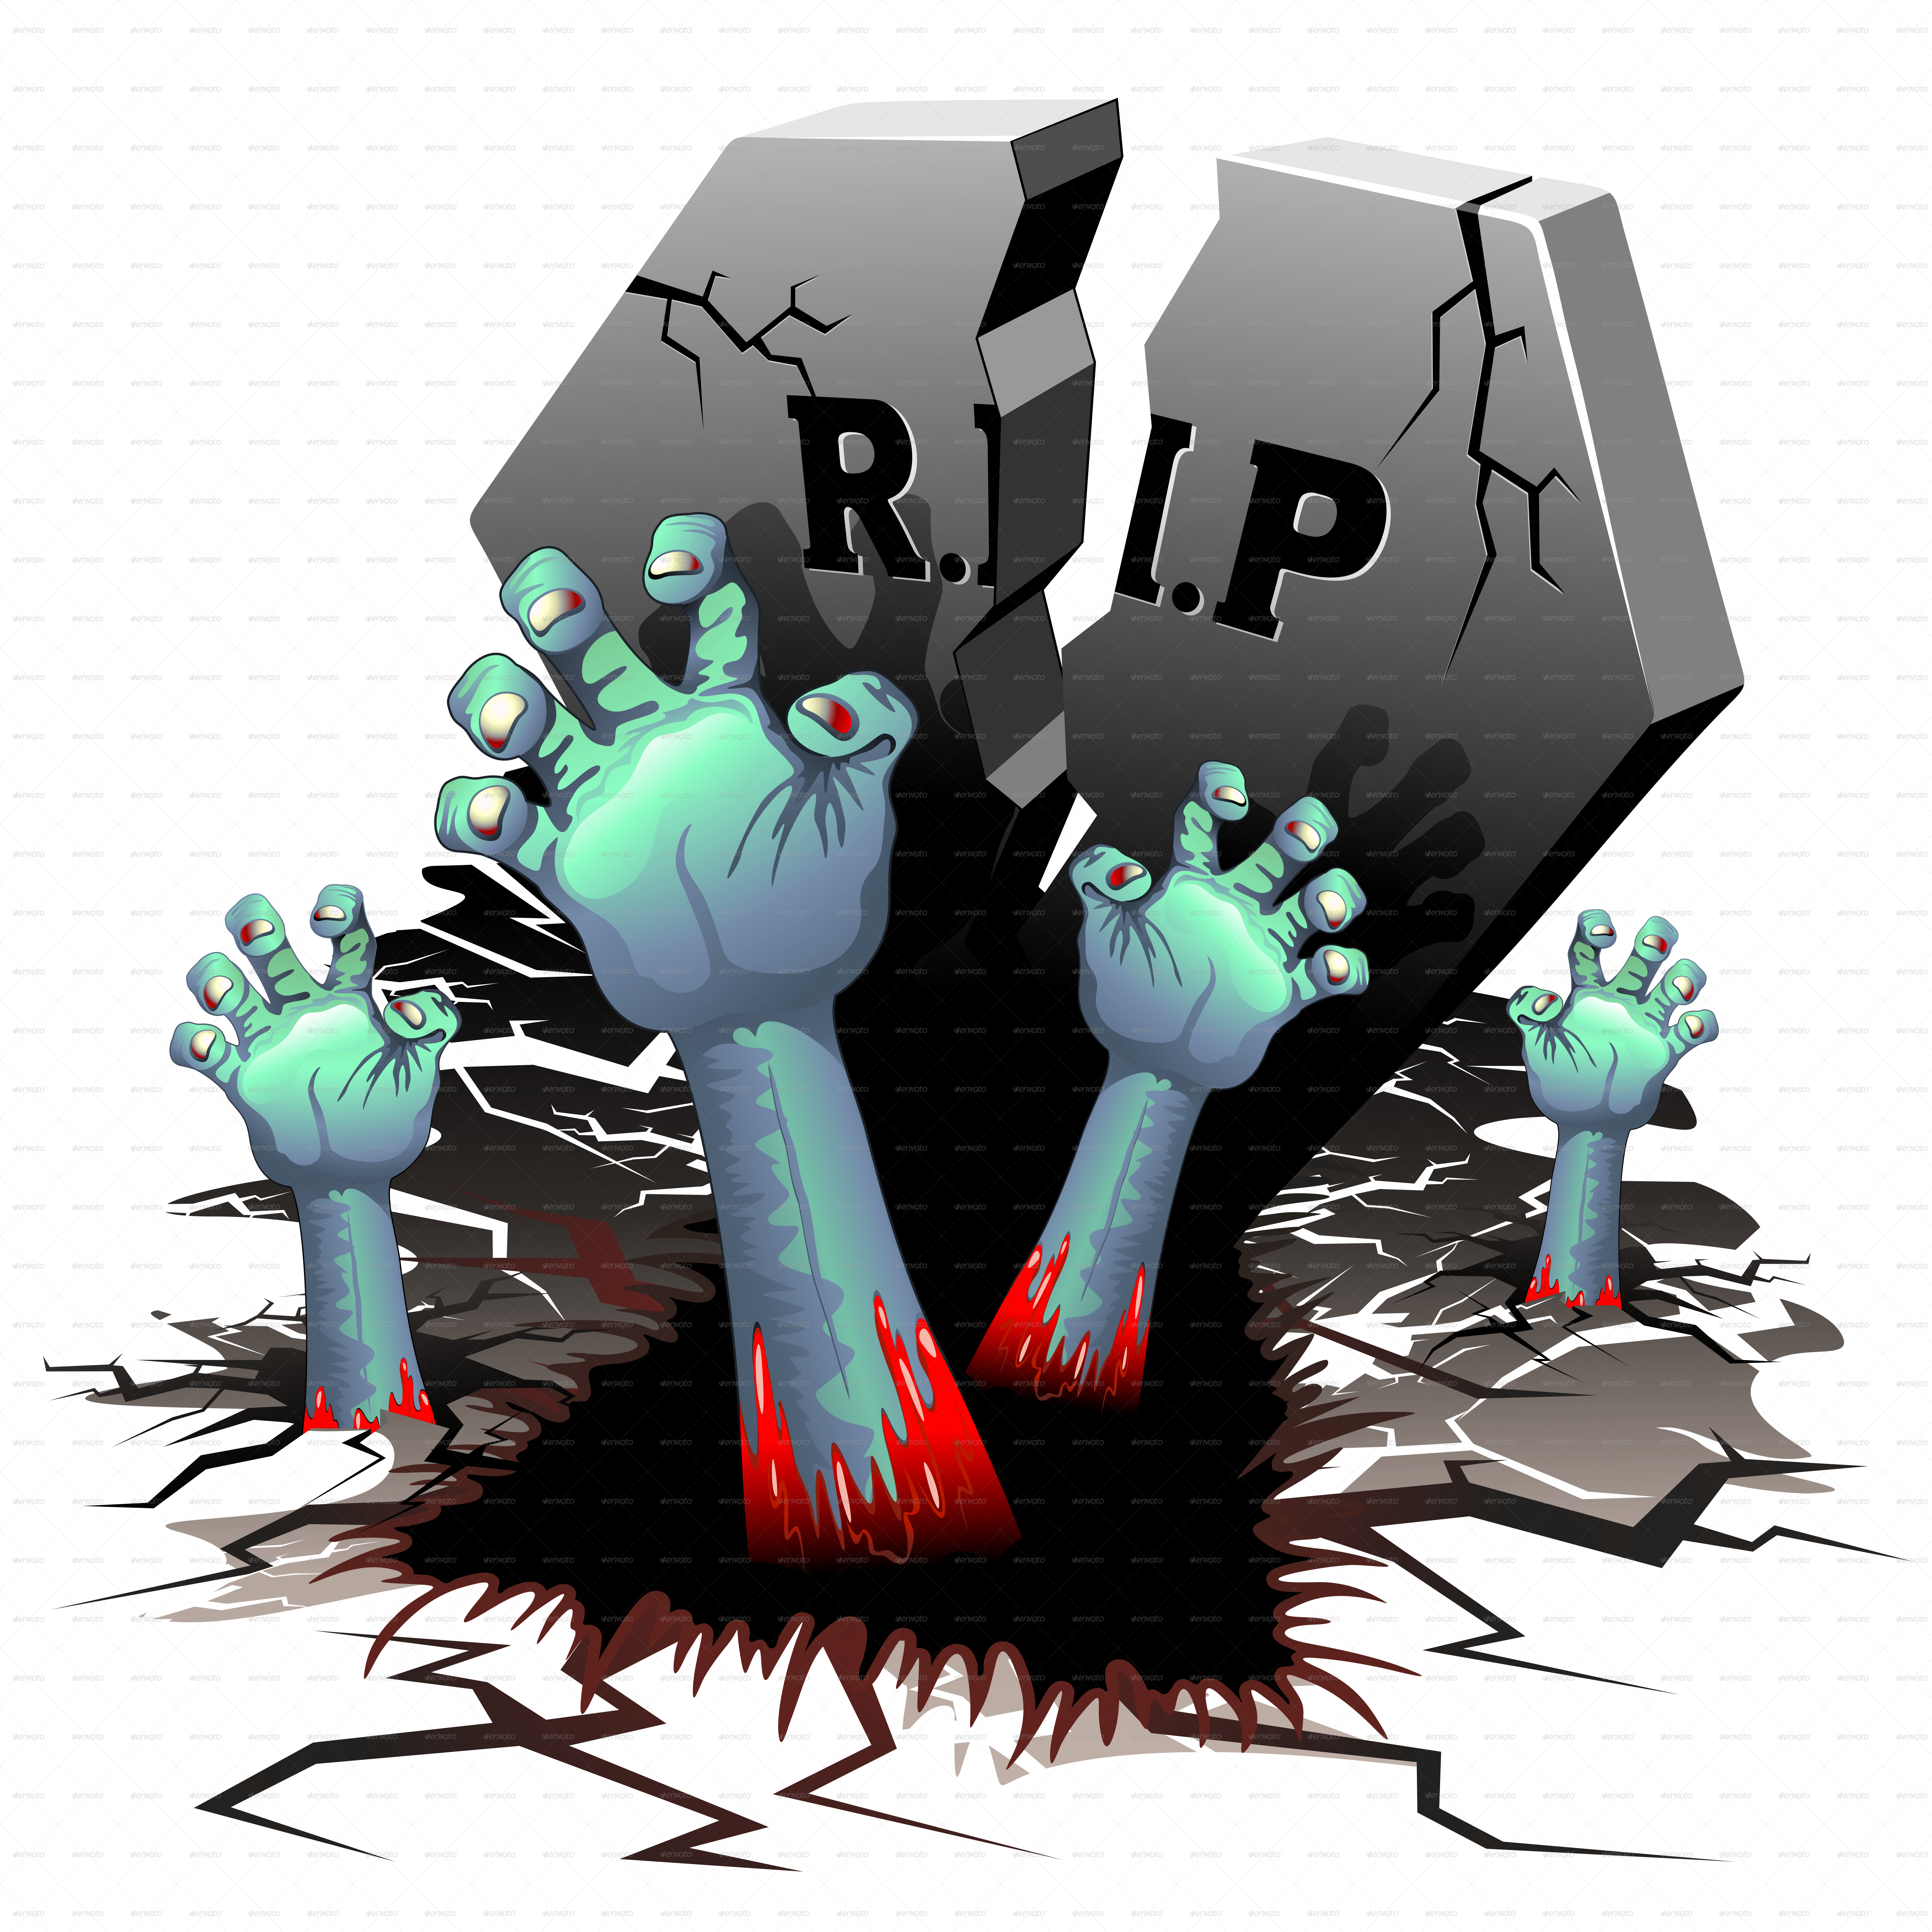 A Cartoon Of Zombie Hands Coming Out Of A Grave